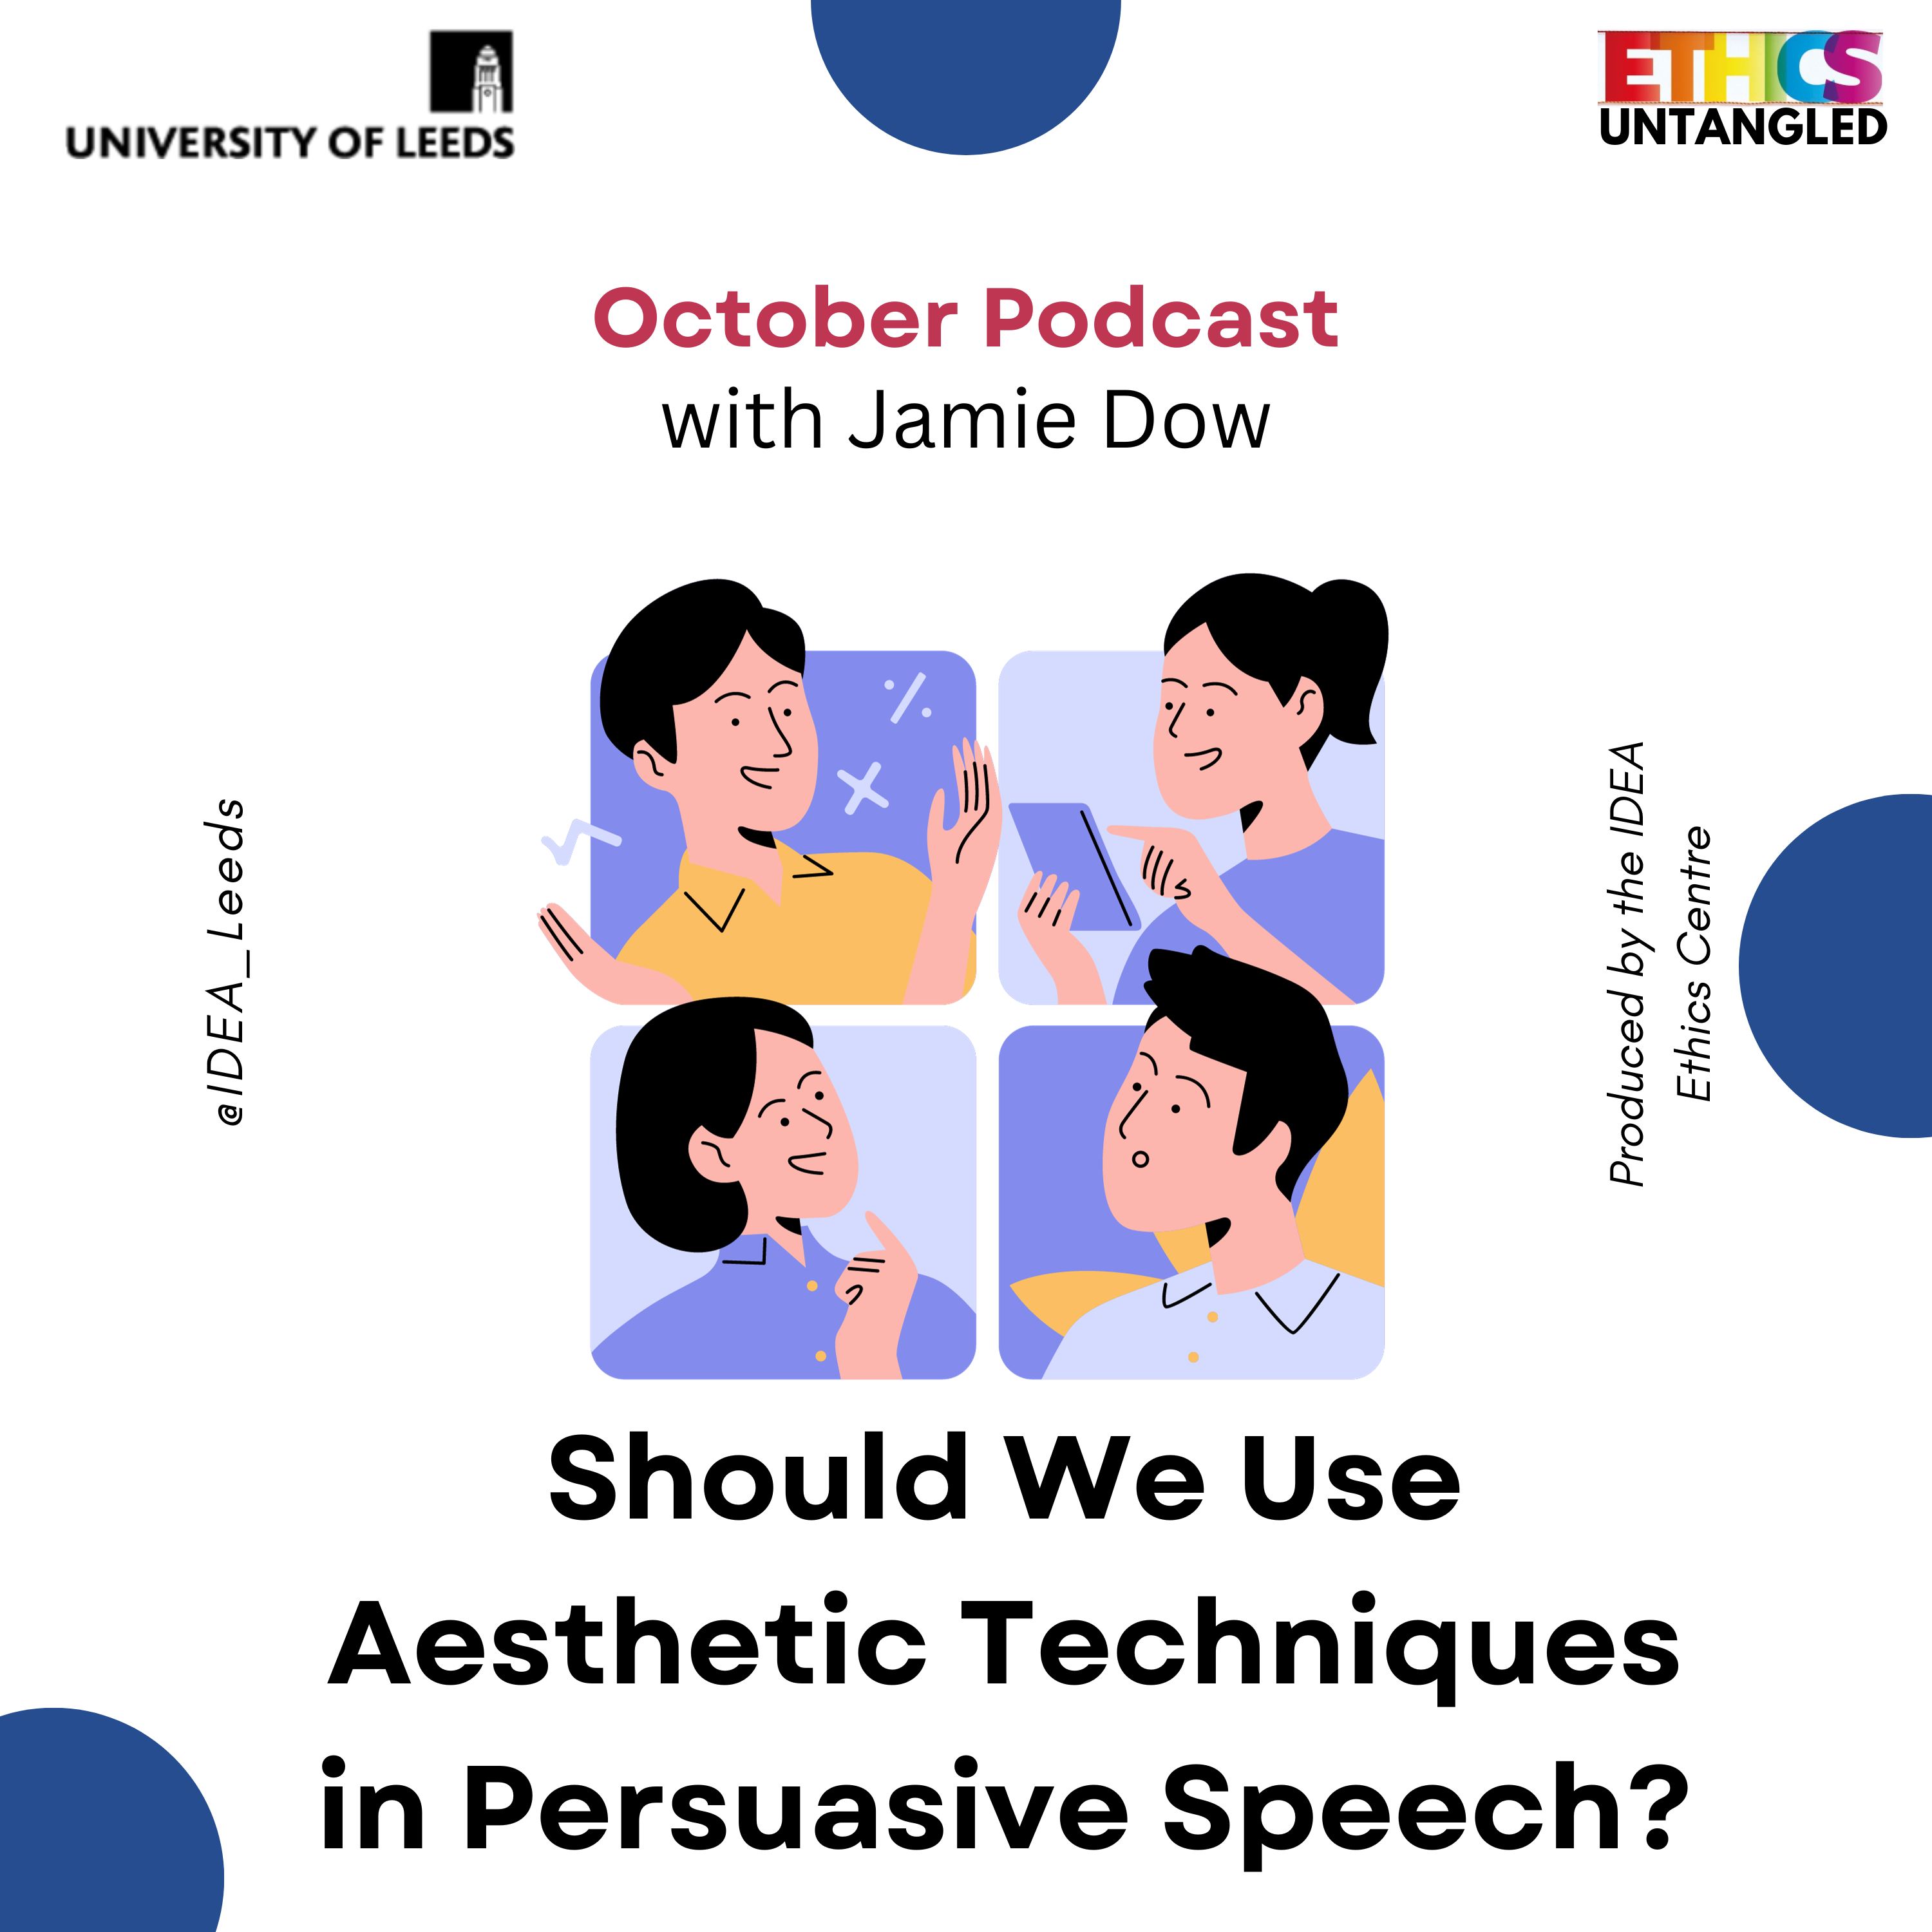 Should We Use Aesthetic Techniques in Persuasive Speech? New podcast out now